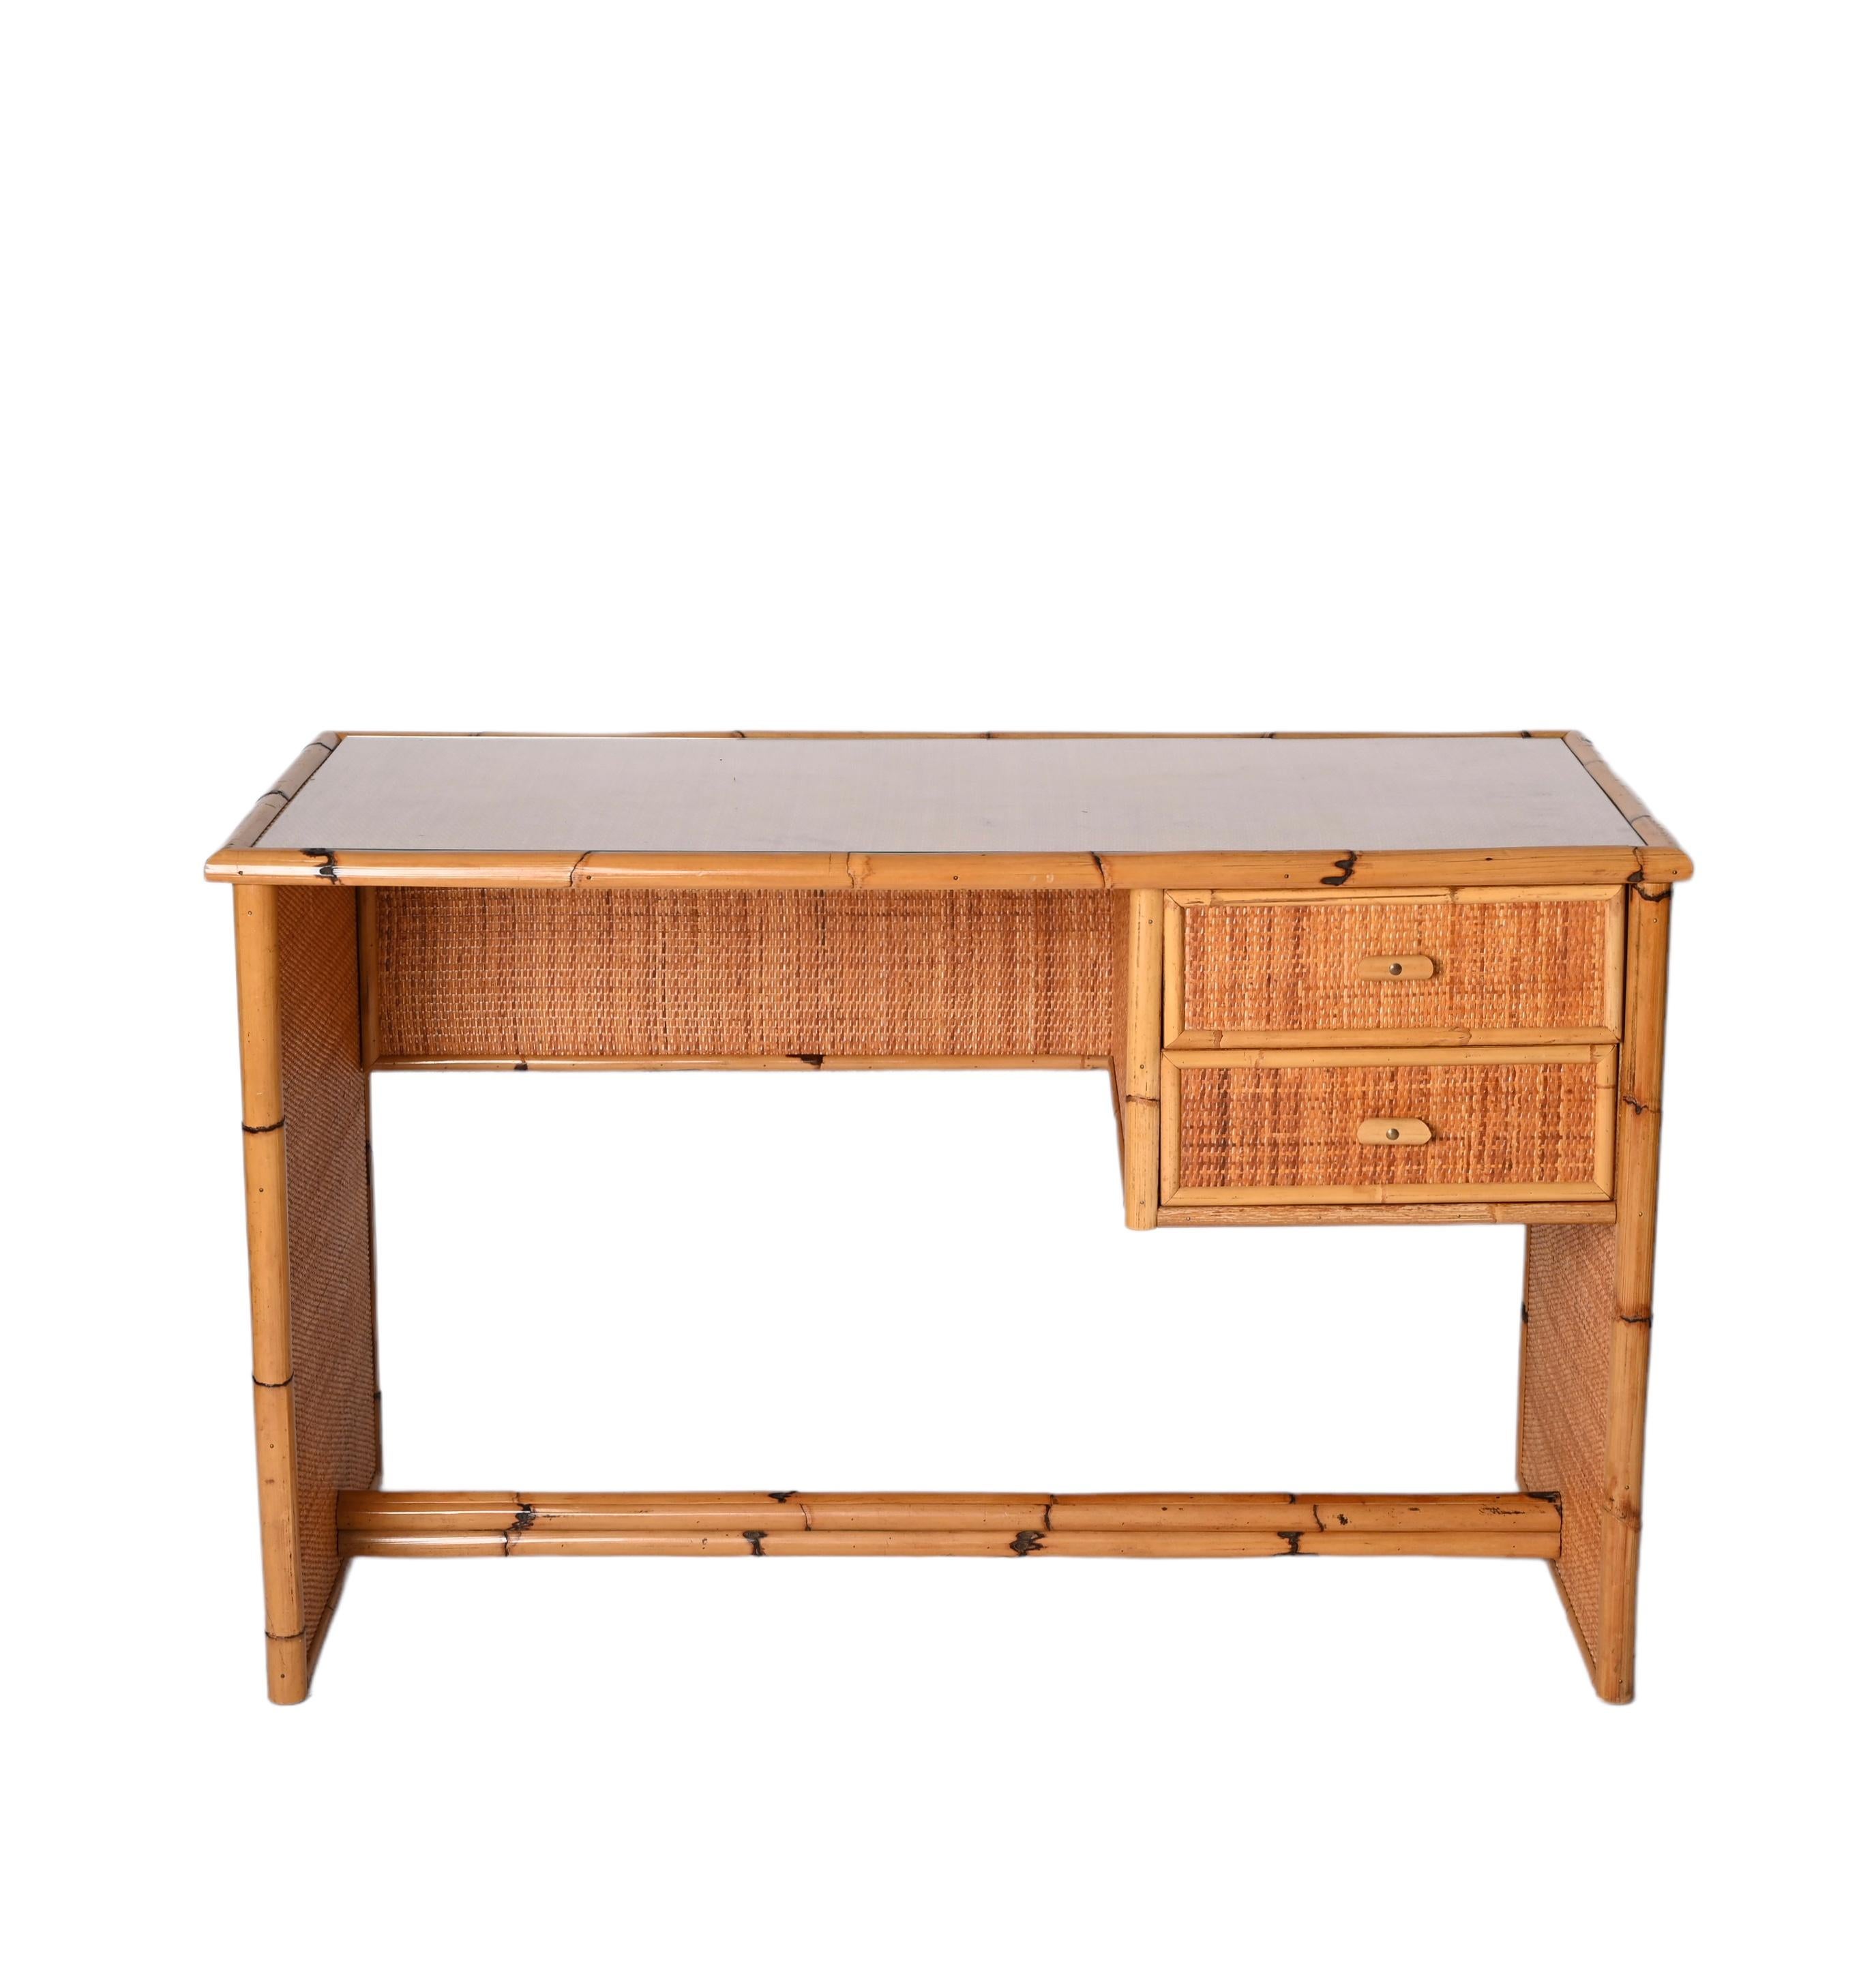 Midcentury Glass Top, Bamboo and Wicker Italian Desk with Drawers, 1980s For Sale 4